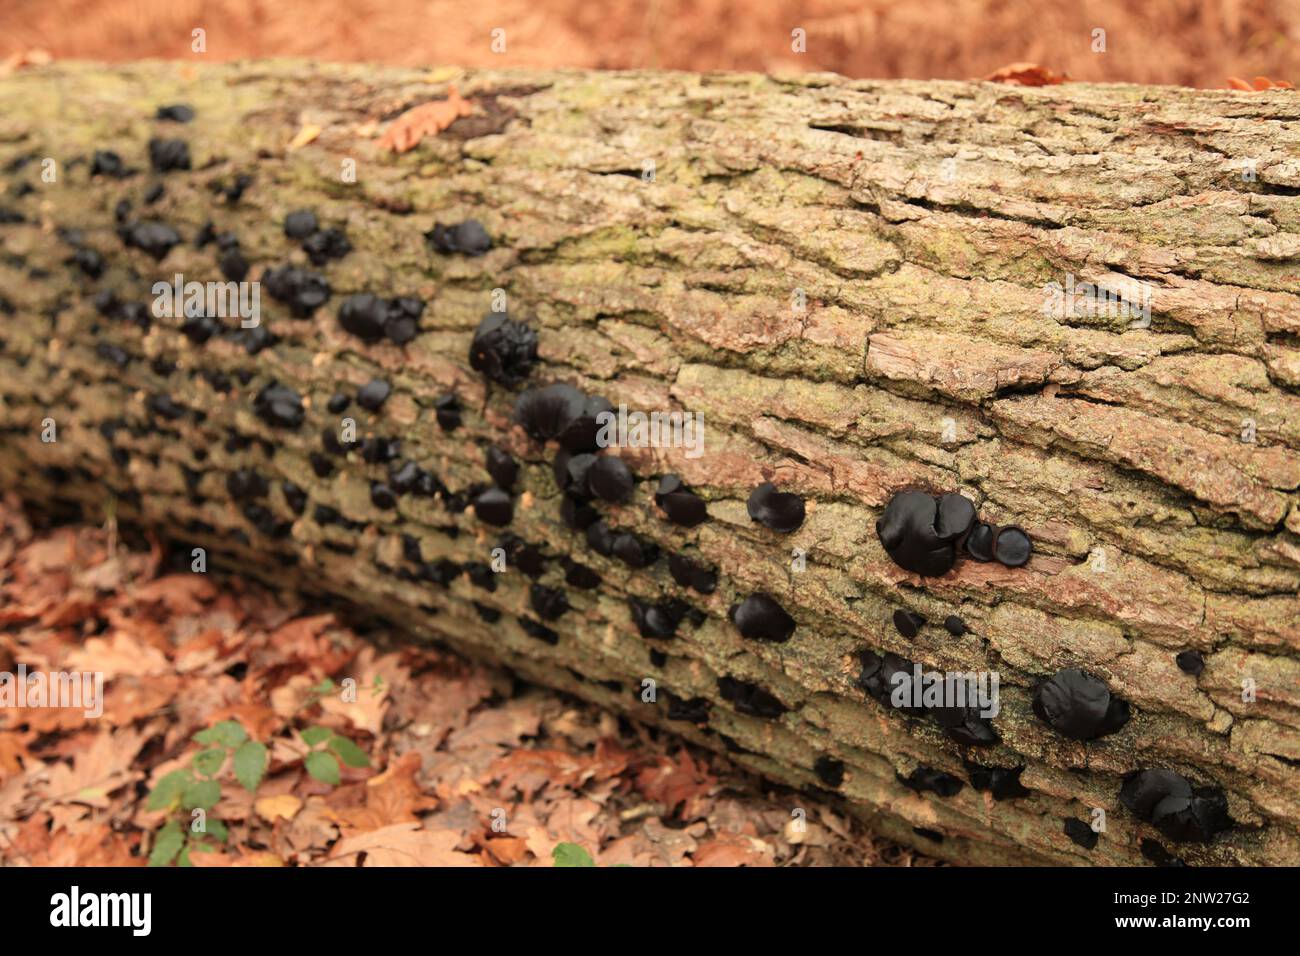 Black bulgars (Bulgaria inquinans) growing on the side of a laid down tree trunk. Stock Photo